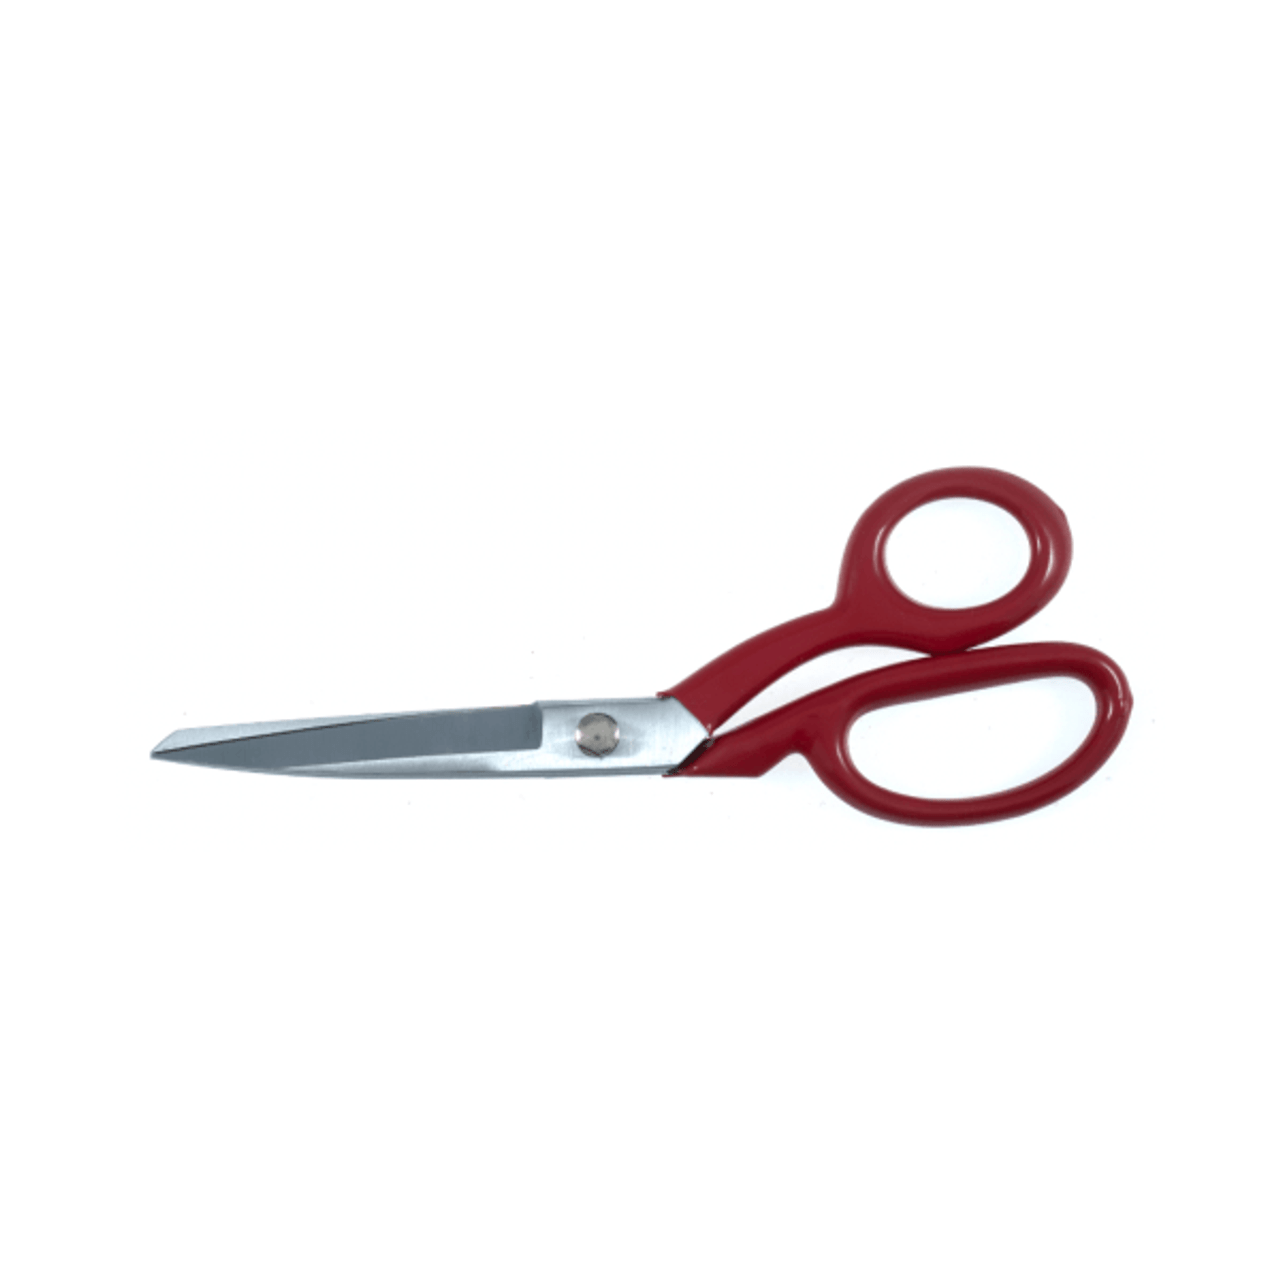 Milward 8.25" Fabric Shears with Stainless Steel Blades